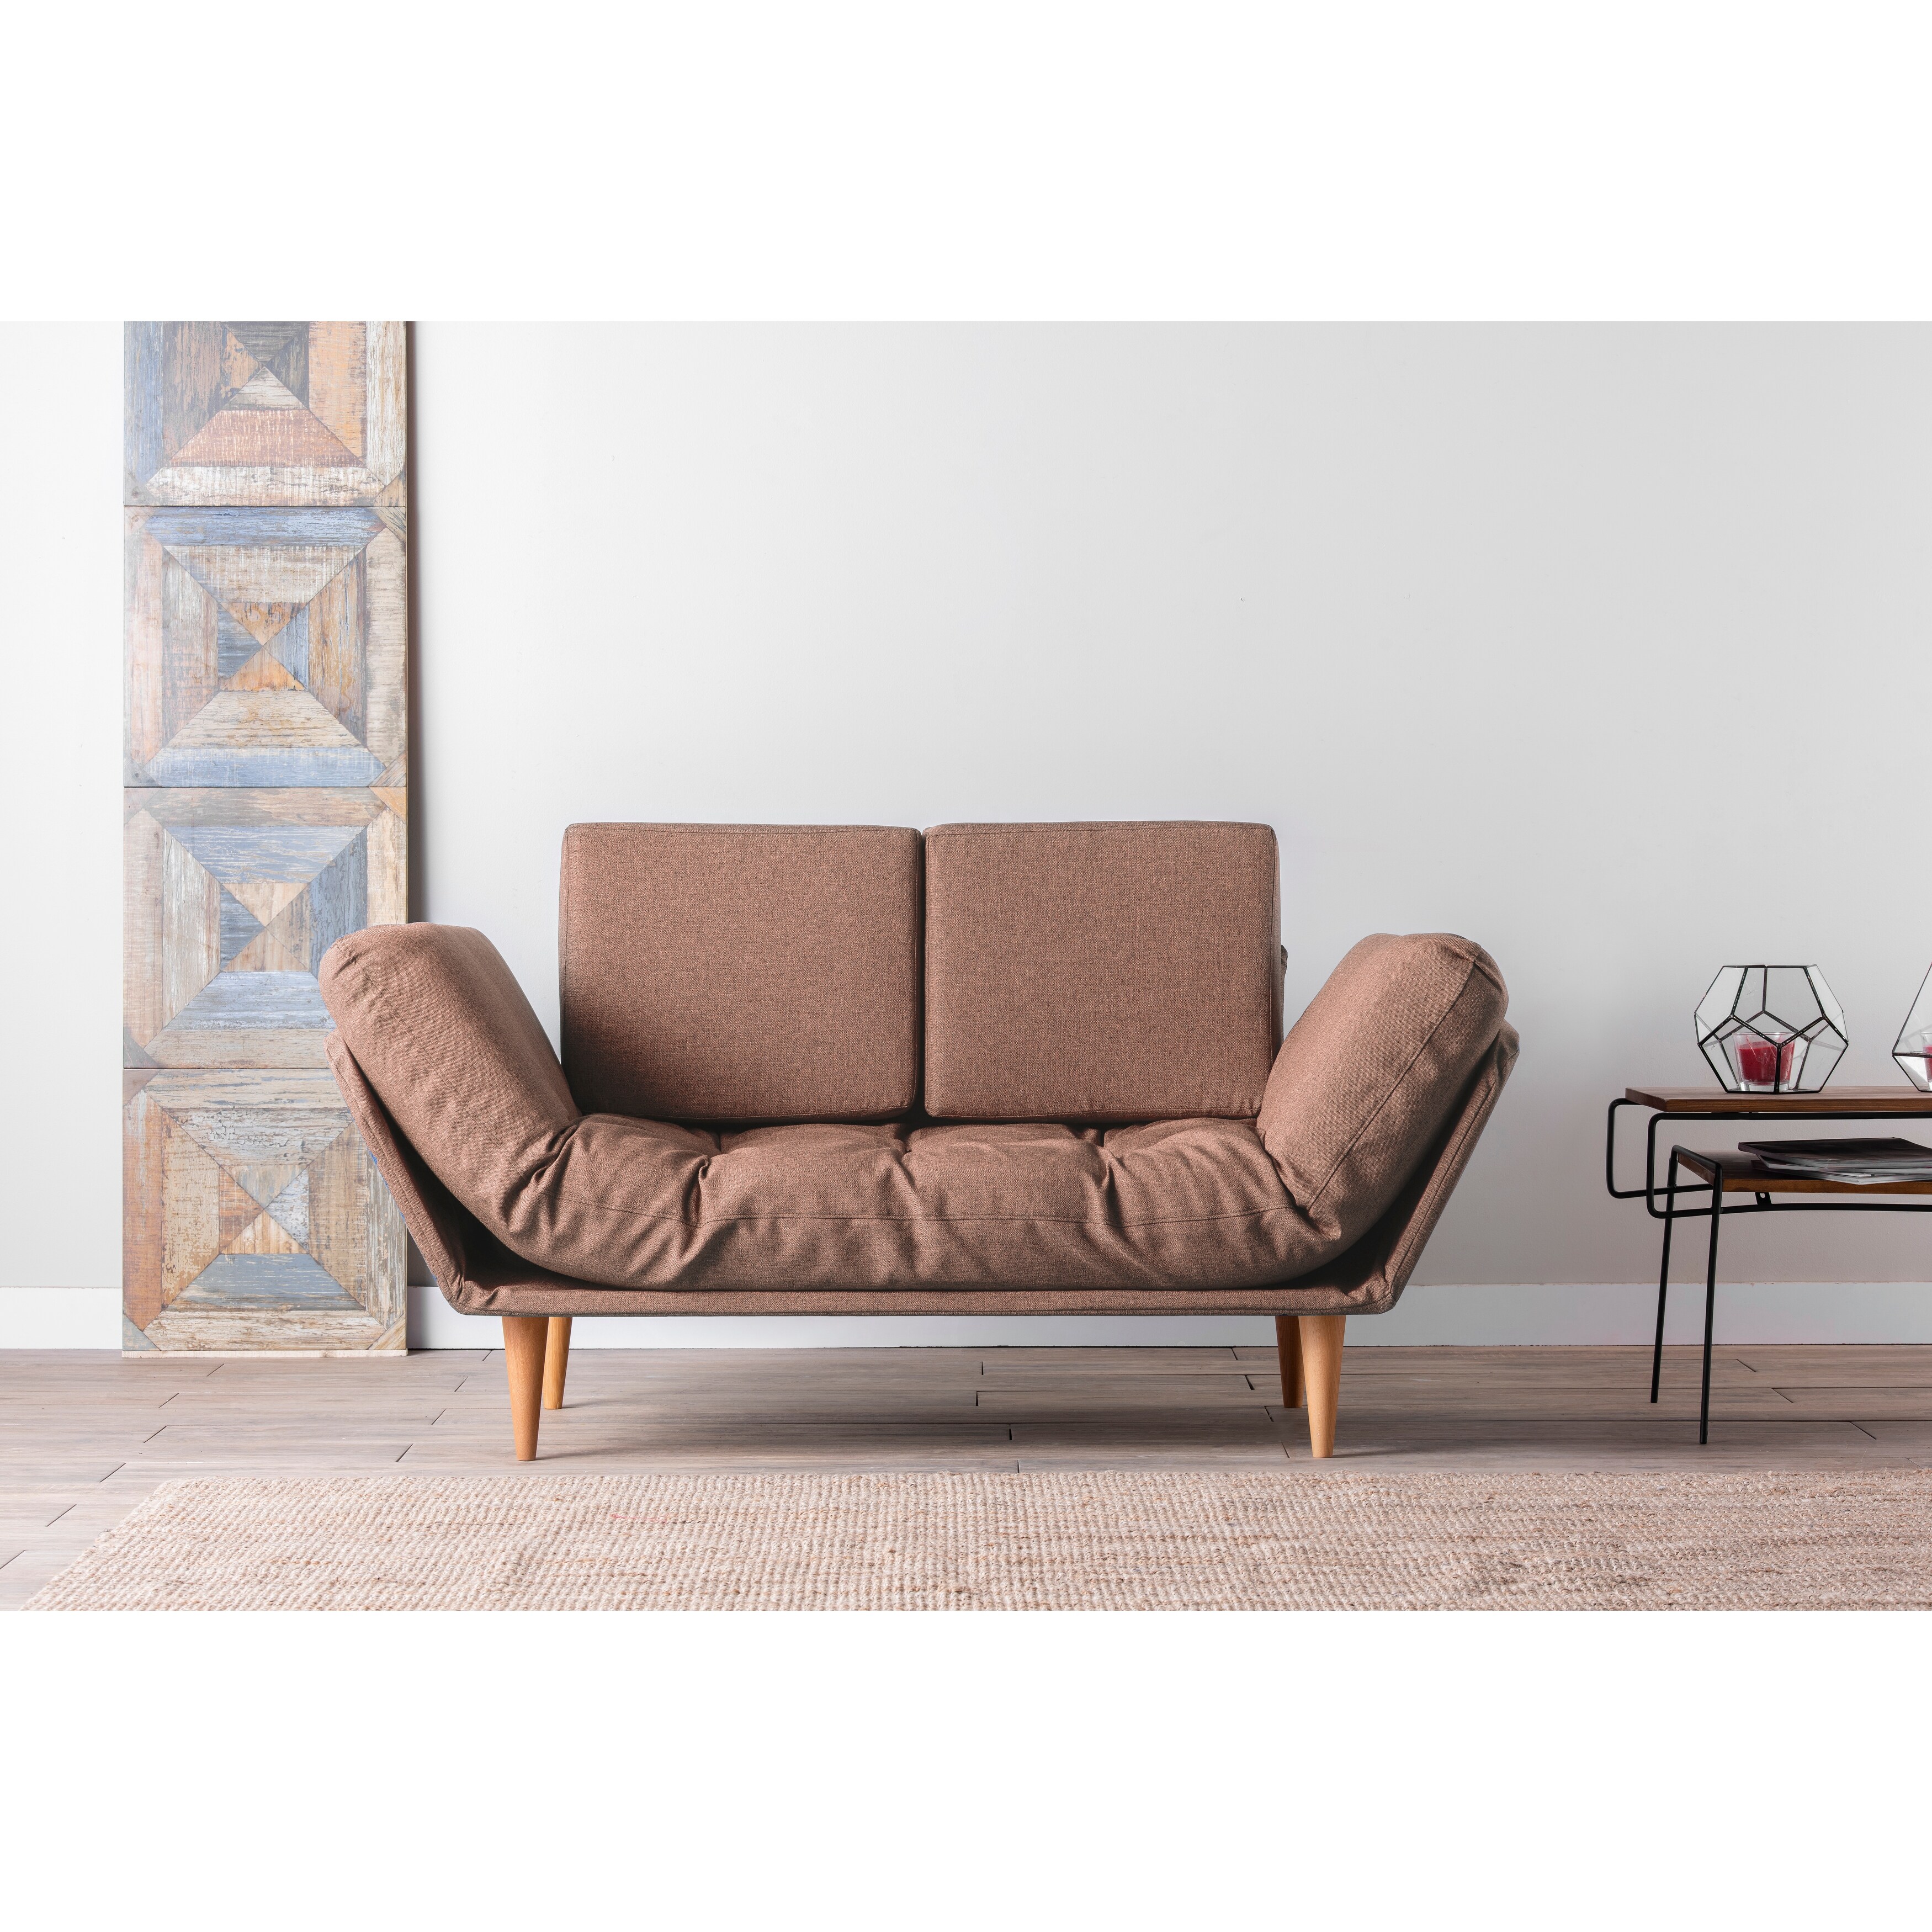 Dida 72 undefinedundefined Flared Arms Futon Loveseat - - 33810836